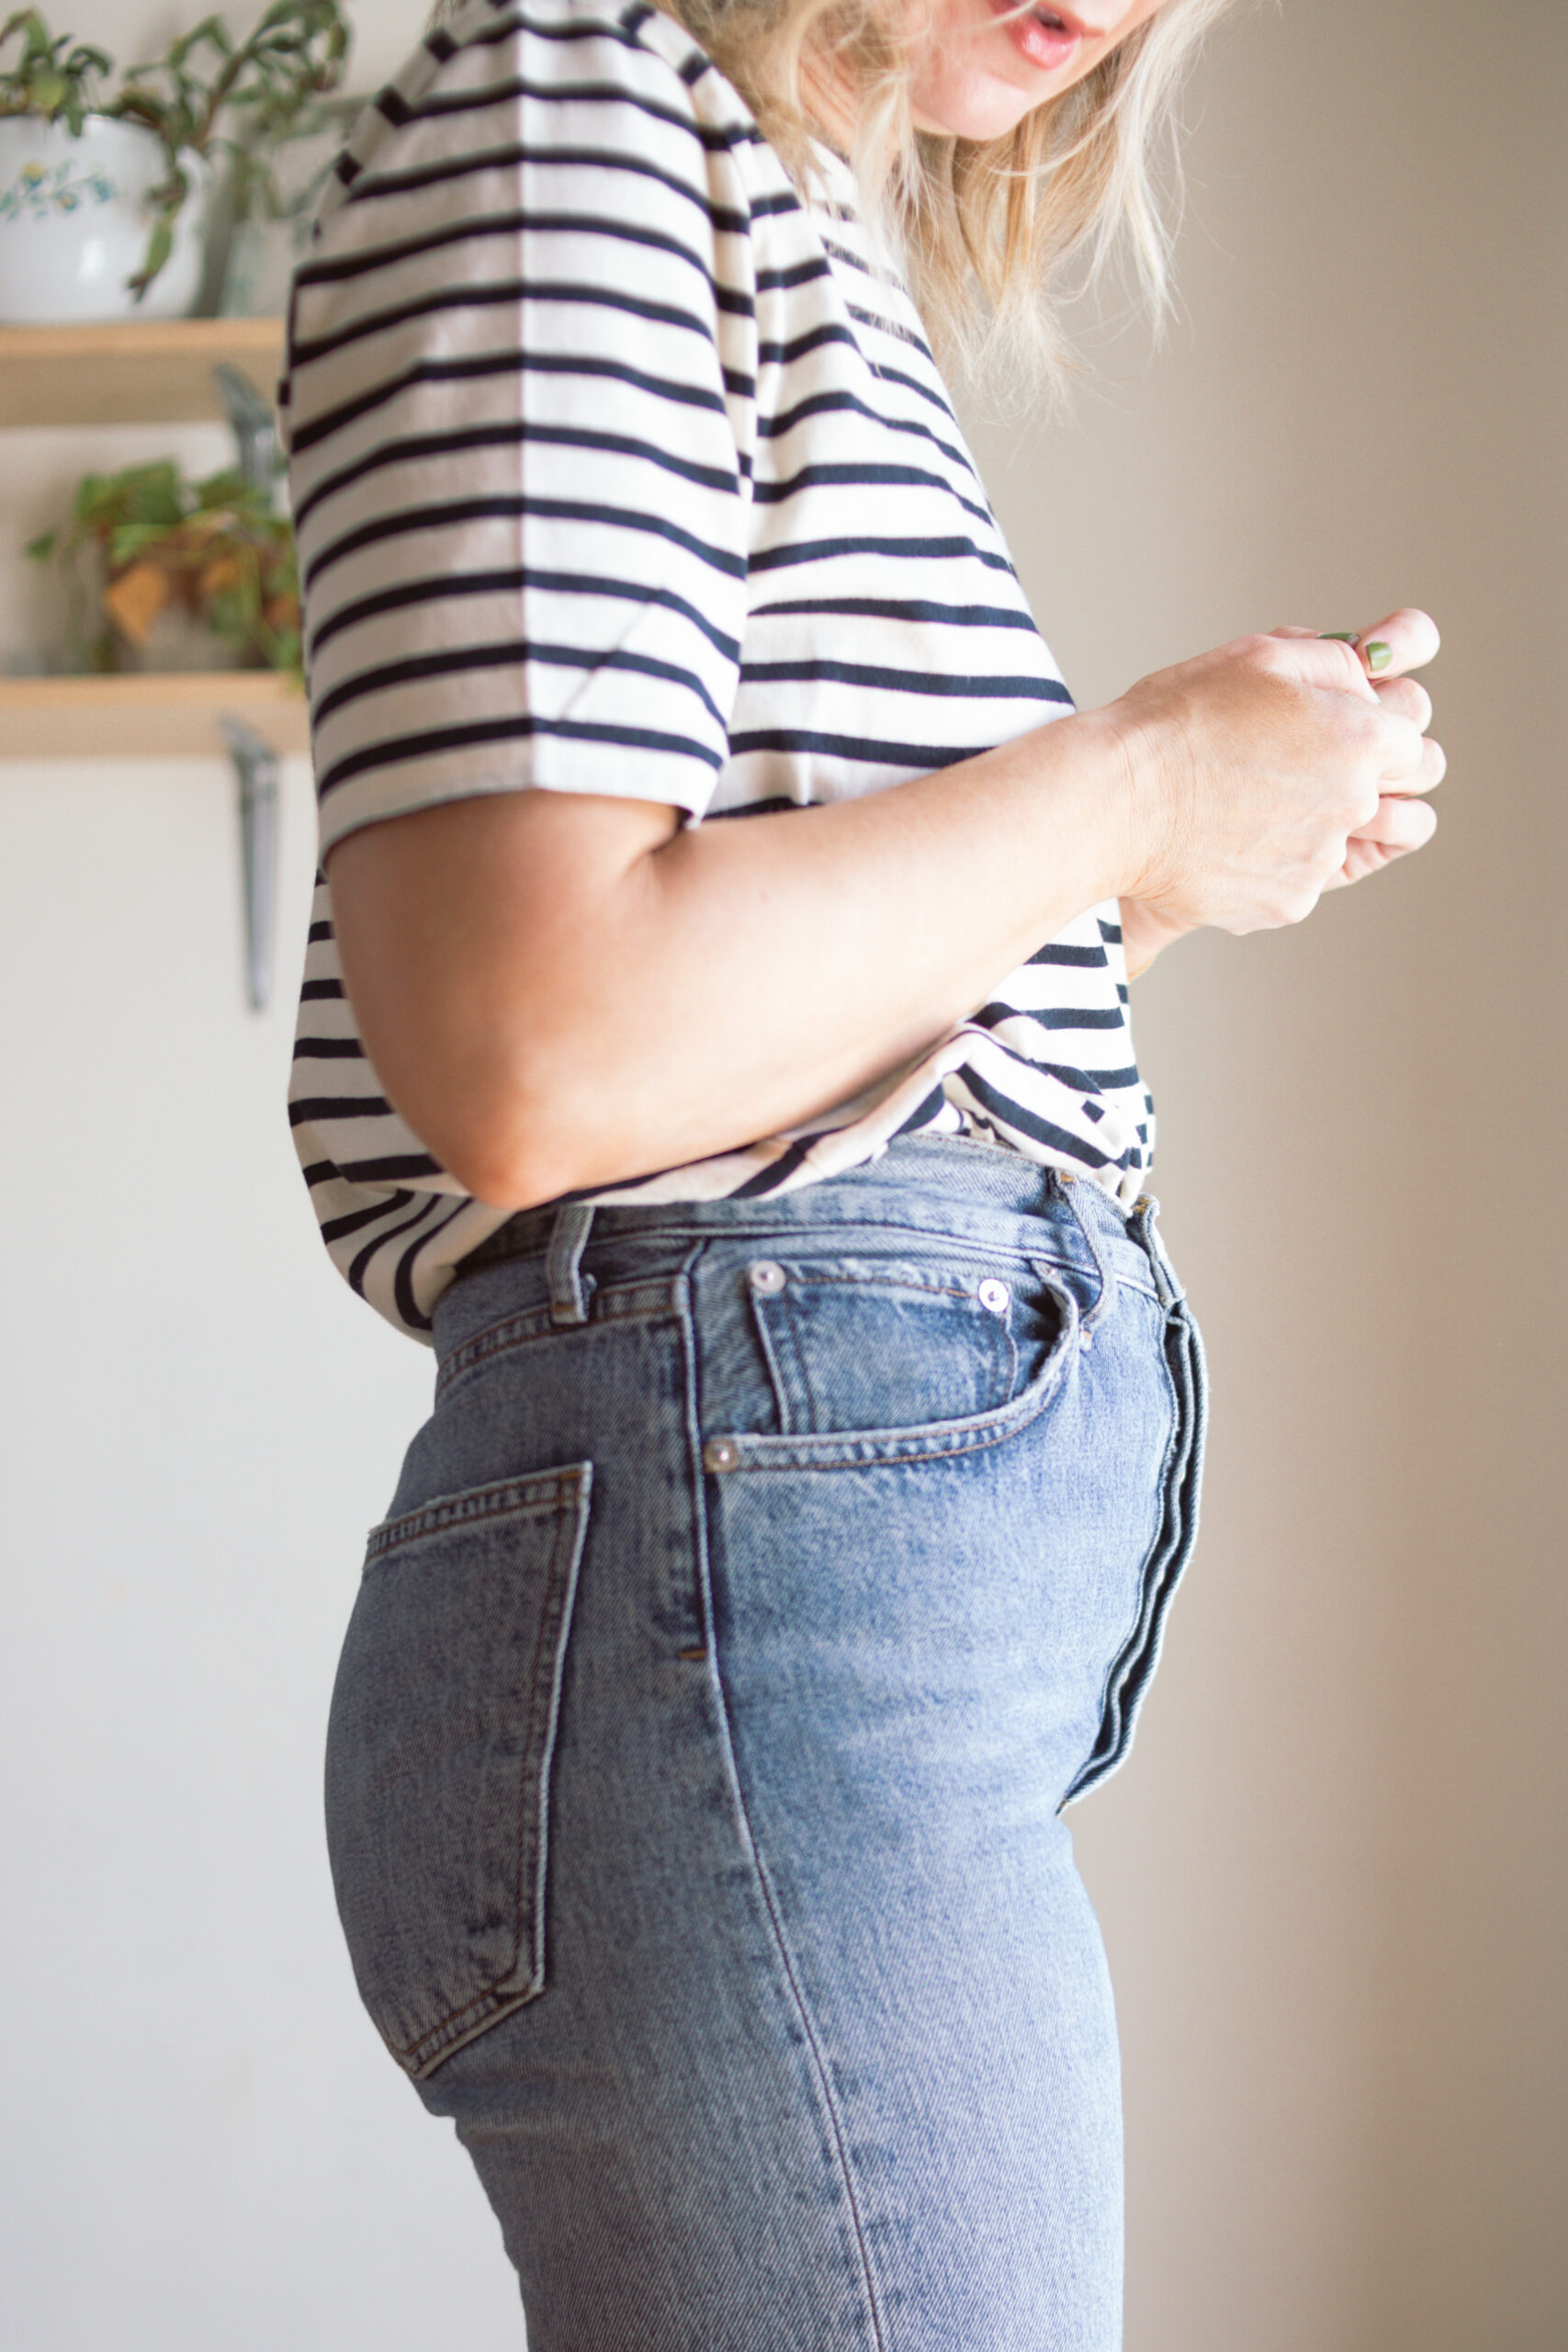 Karin Emily wears a pair of AGOLDE 90's pinch waist jeans with a striped tee and brown sandals for her AGOLDE denim guide